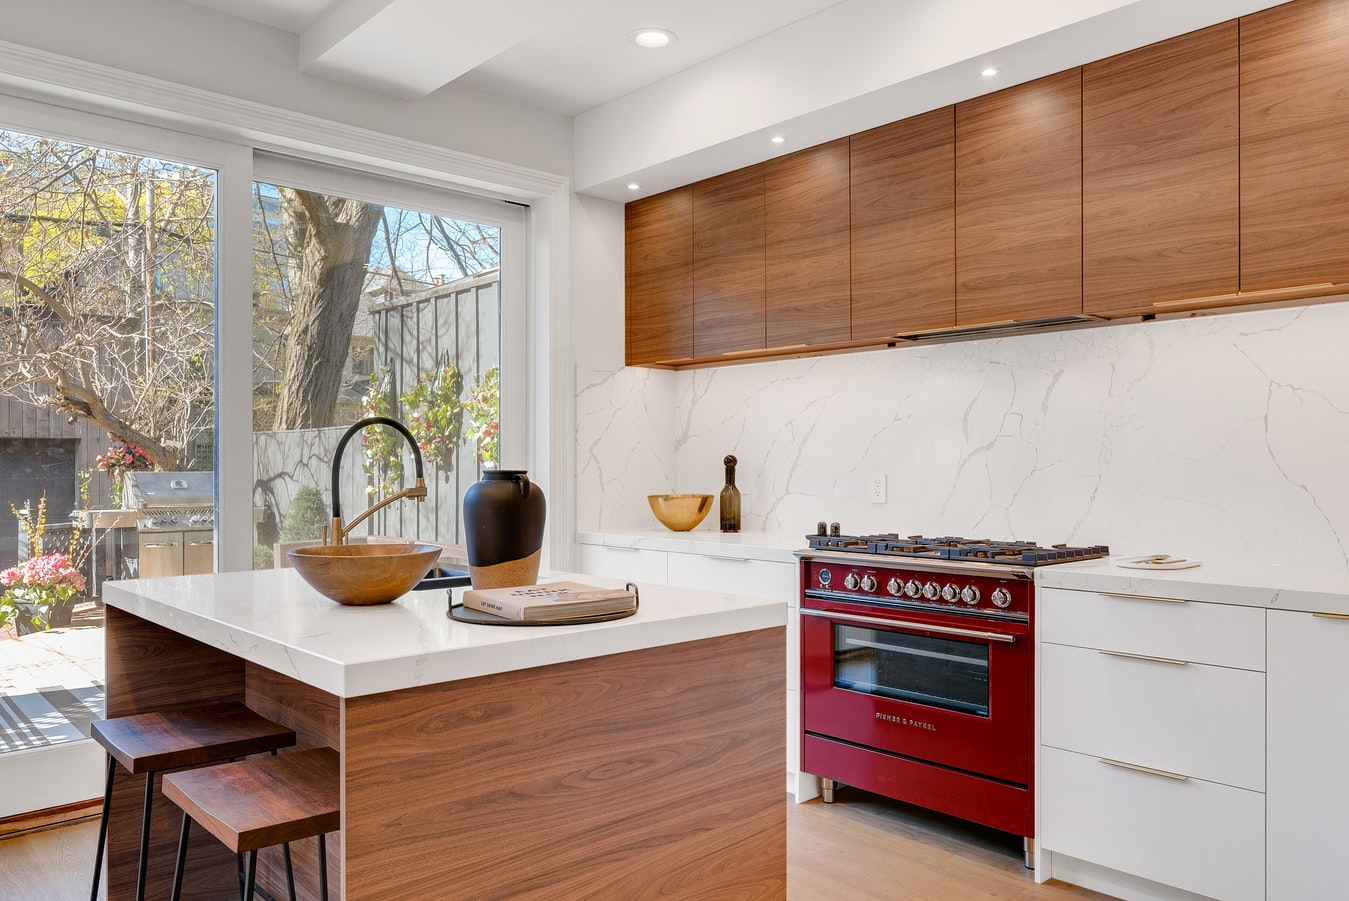 White countertops with a contrasting red cooker